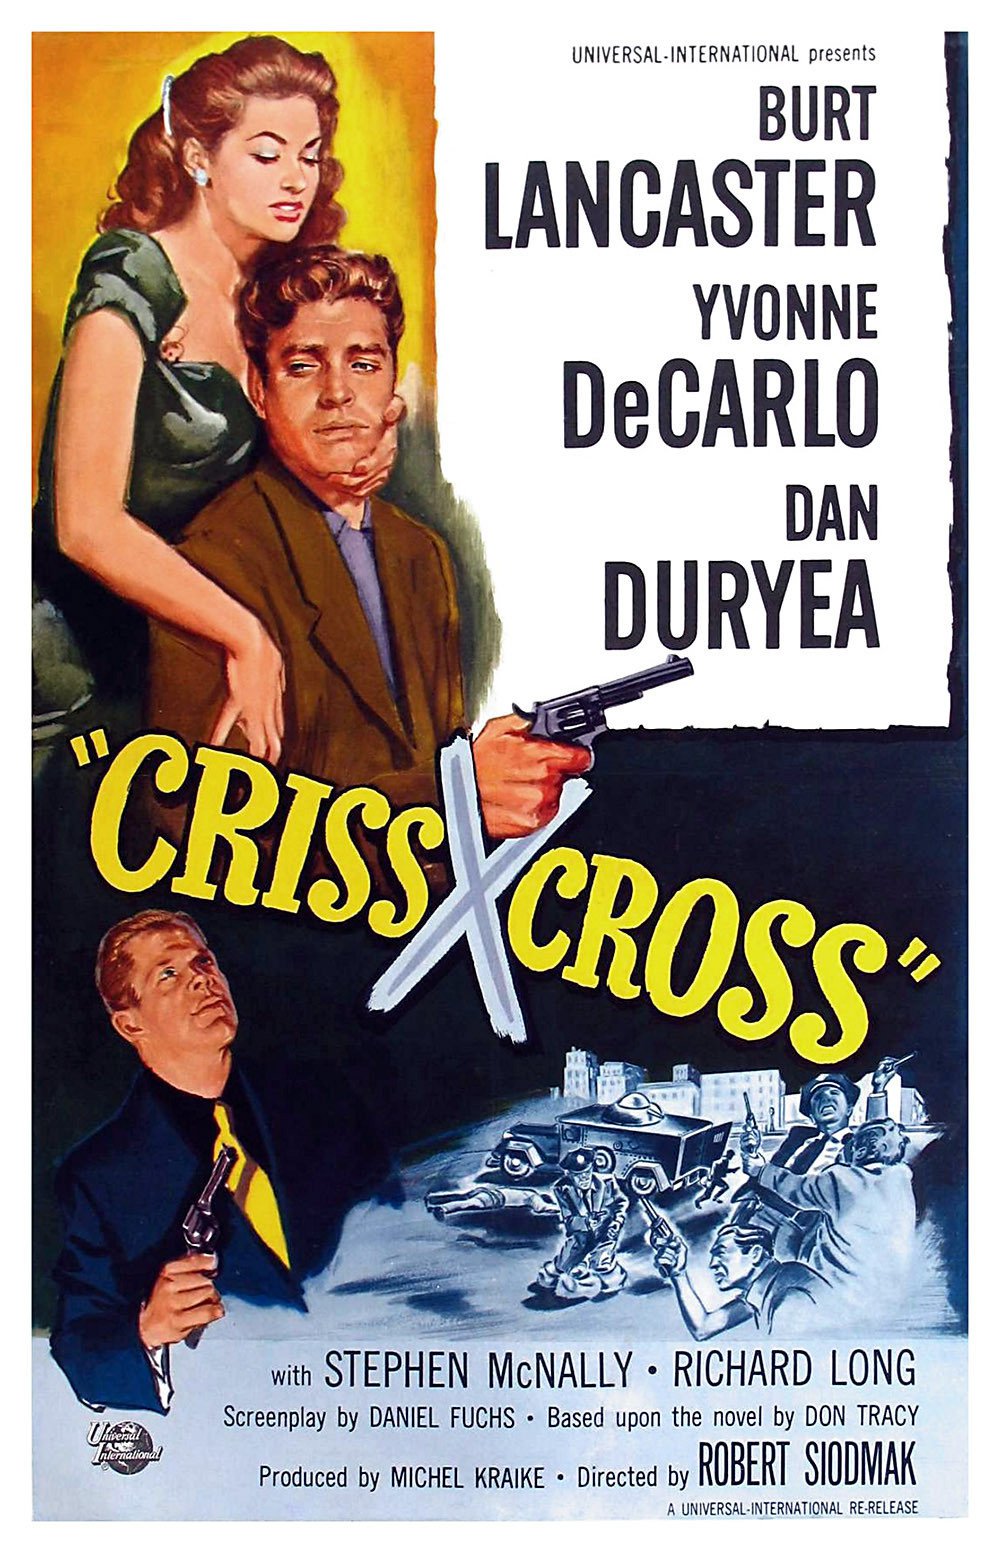 Aero Theatre Presents: Double Feature Criss Cross and Black Angel